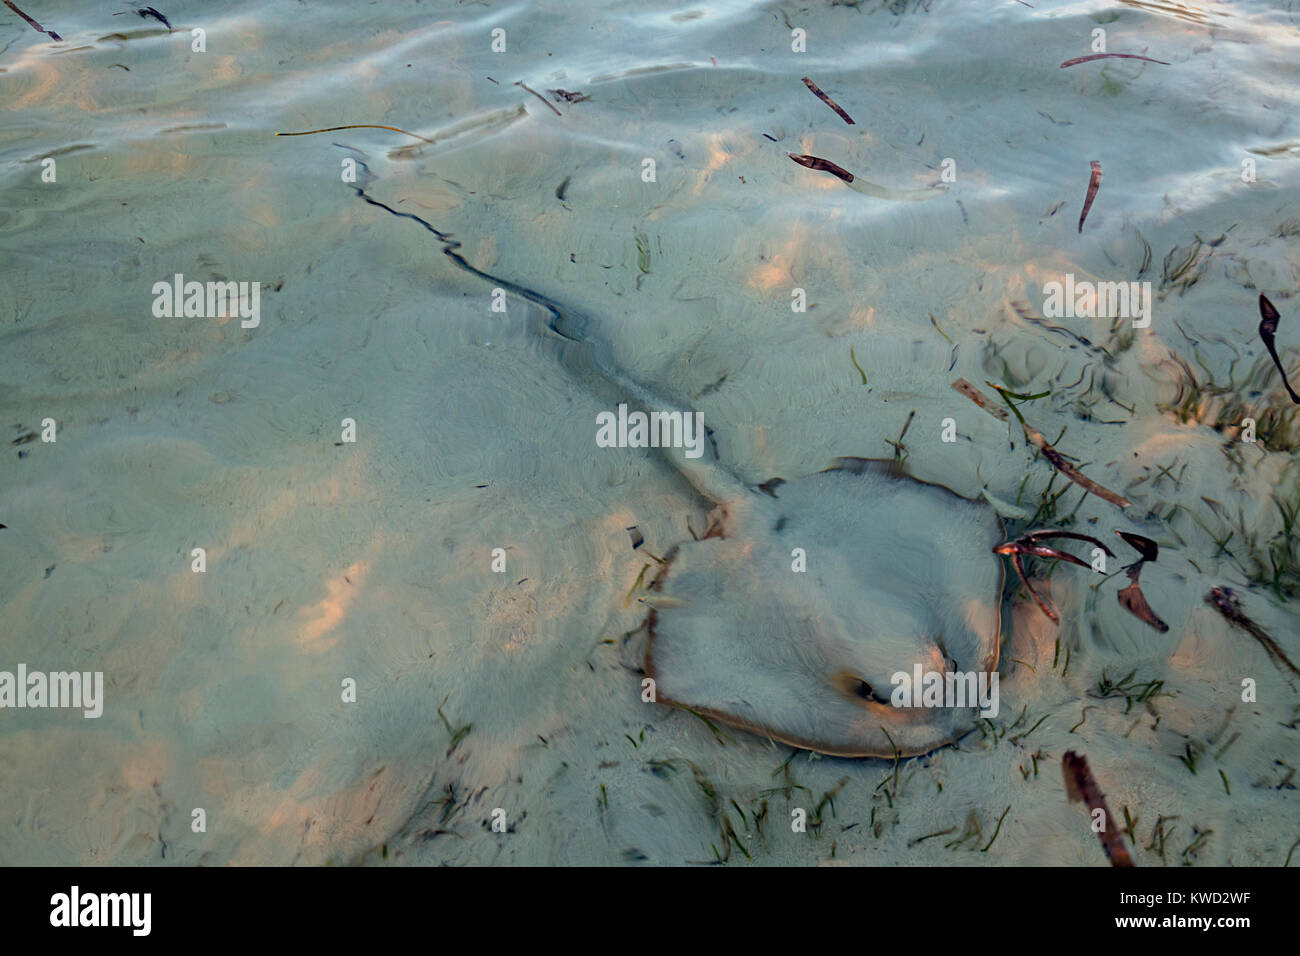 Cowtail stingray, Cowtail ray (Pastinachus sephen) on the bottom at low tide. Stock Photo